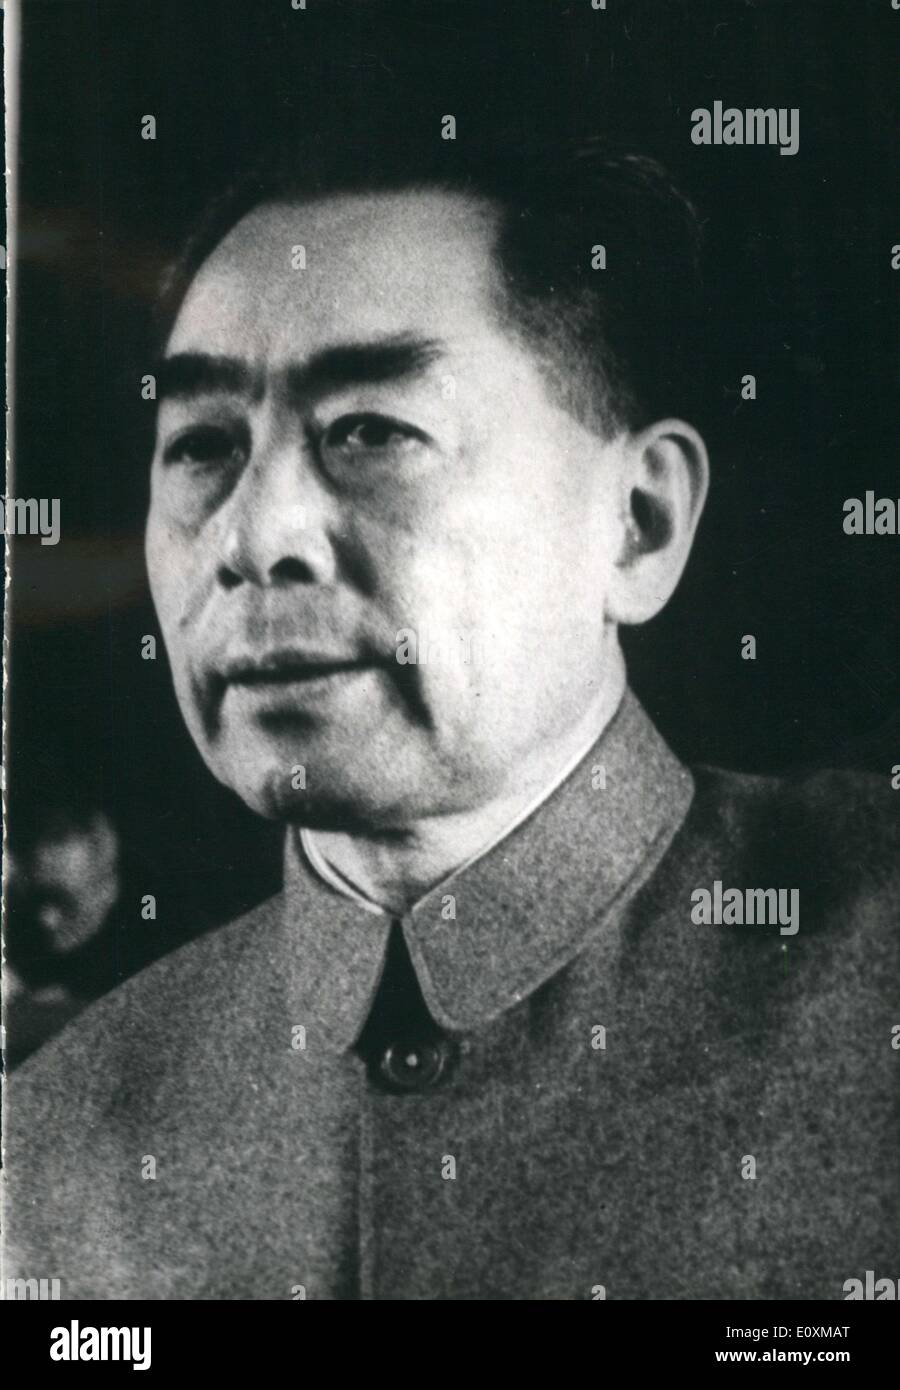 May 16, 1967 - Chou On Vietnam: In A recent interview given to a Foreign Correspondent Chou En Lai Stated the circumstances under which China May interview in the Vietnam war. Photo shows A recent Portrait of Chou En Lai. Stock Photo